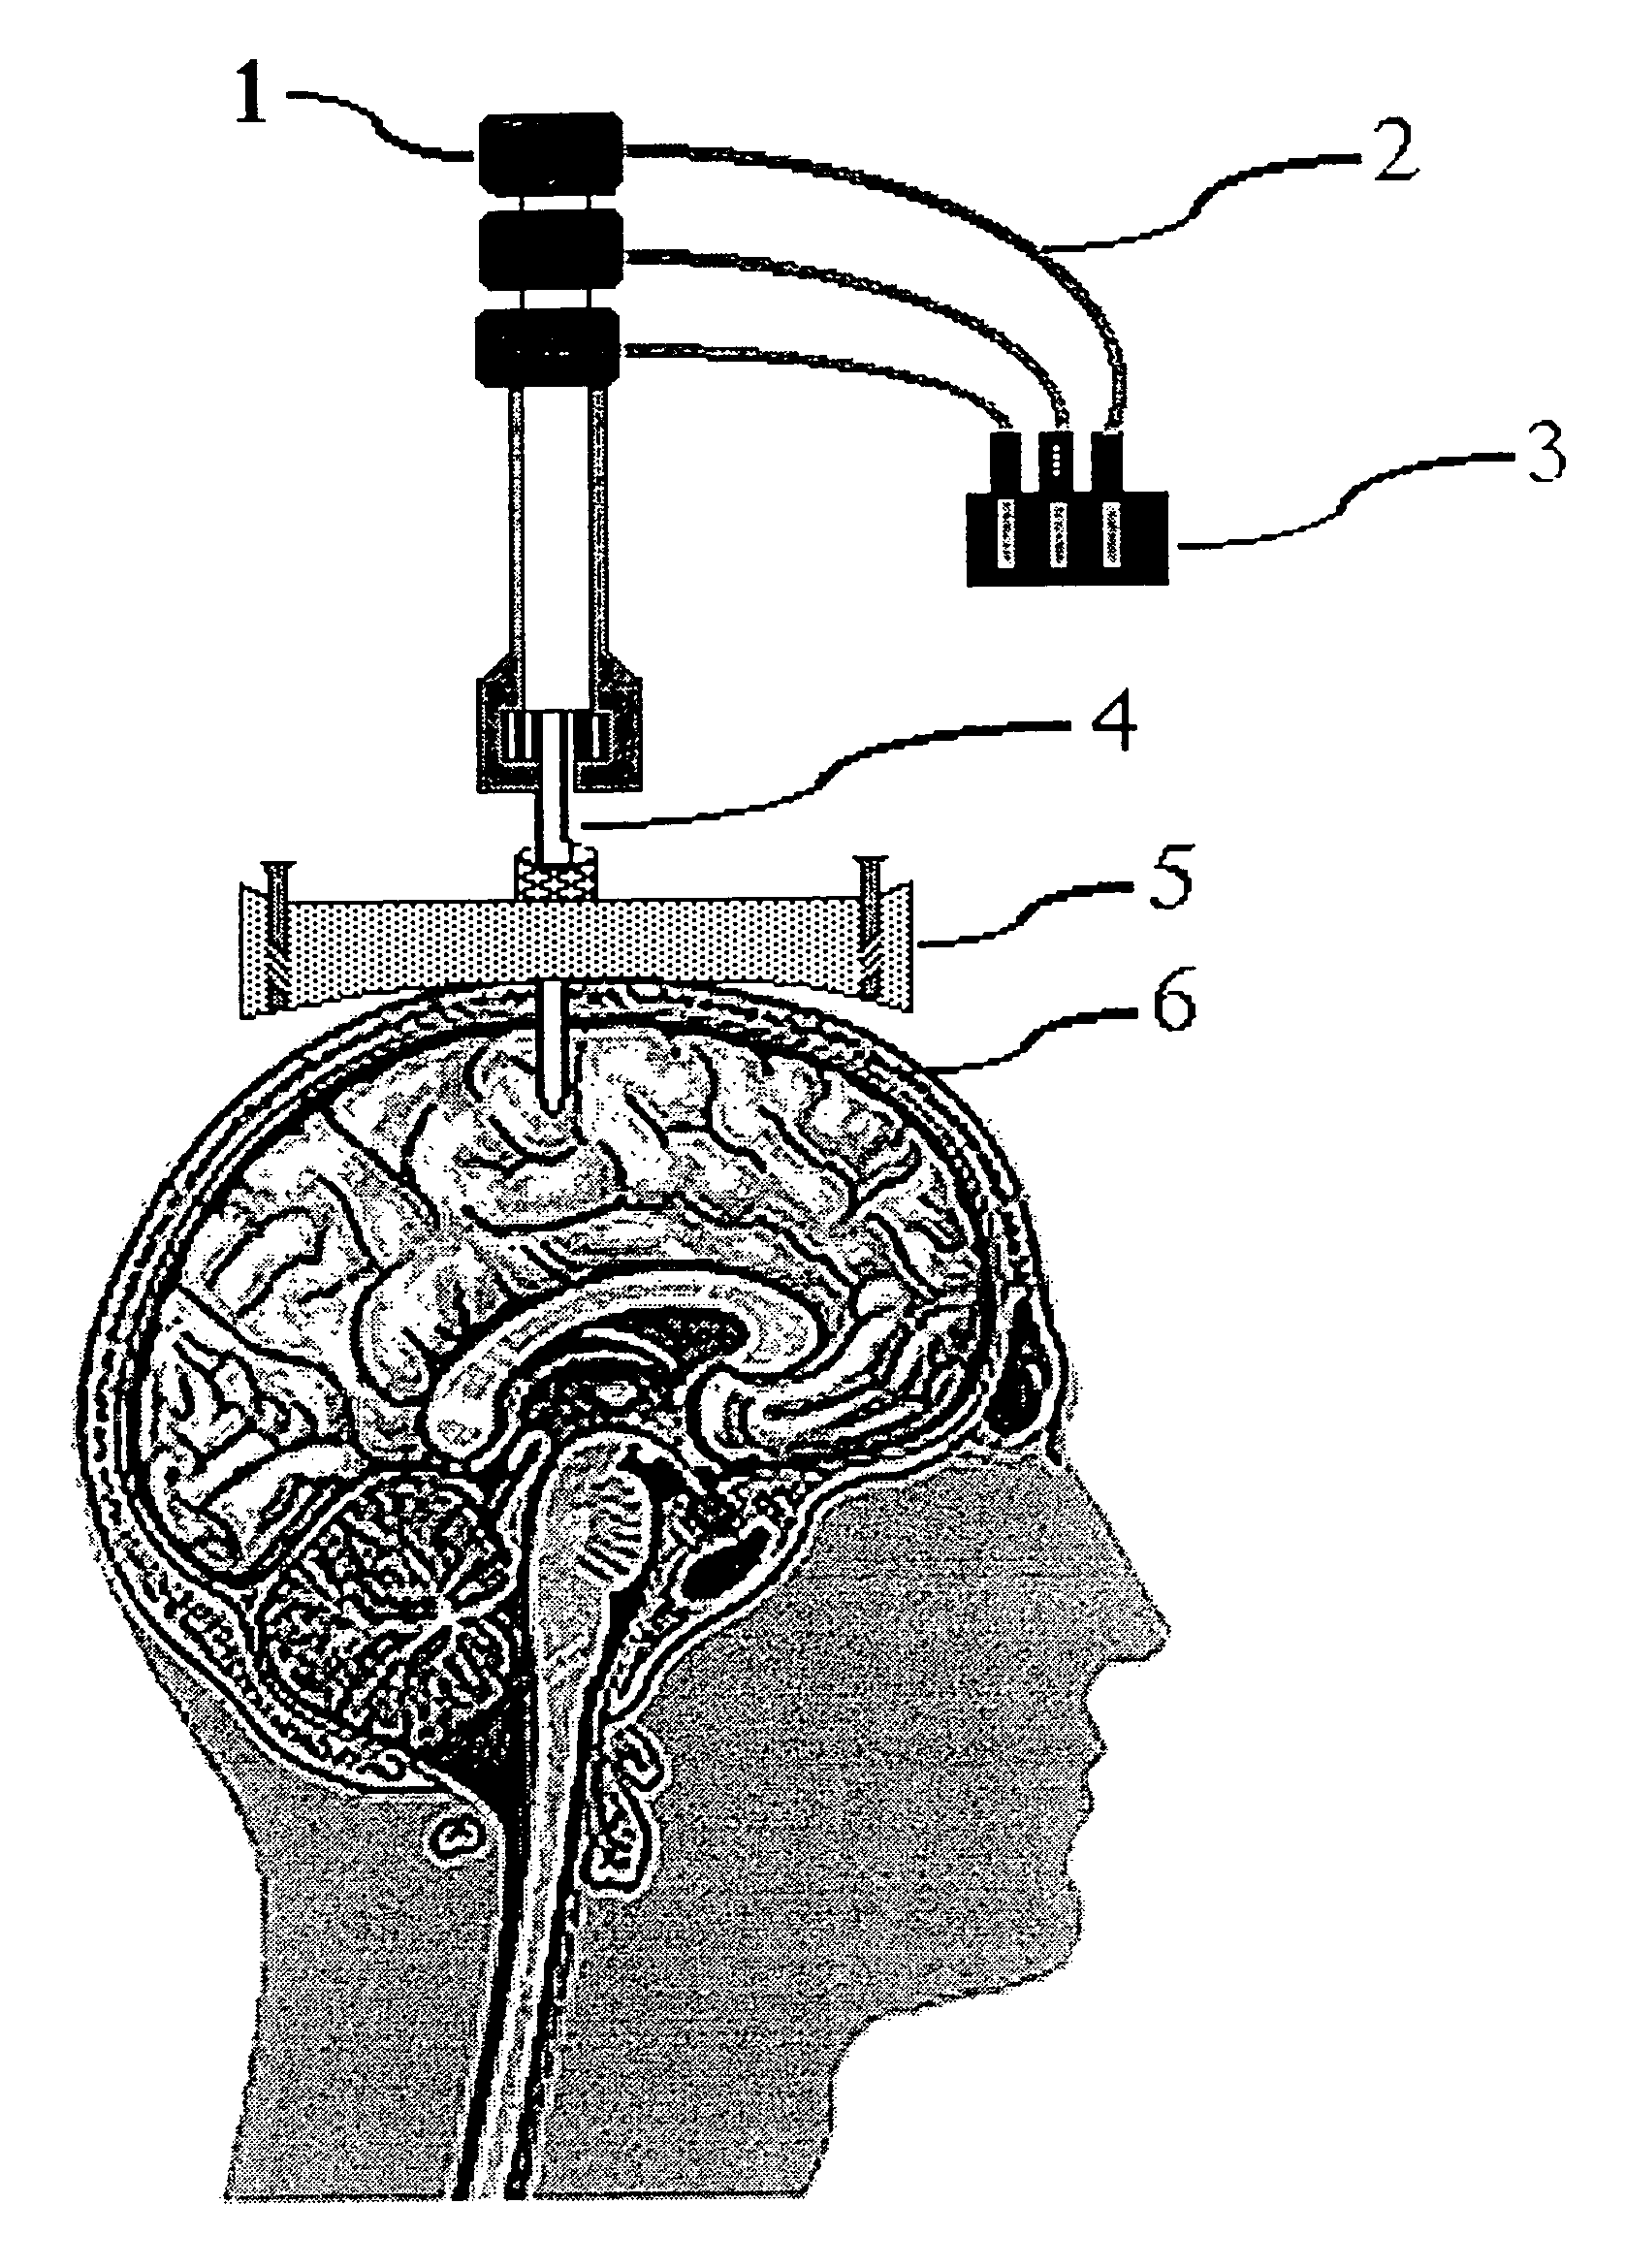 Magnetic resonance apparatus for use with active electrode and drug deliver catheter